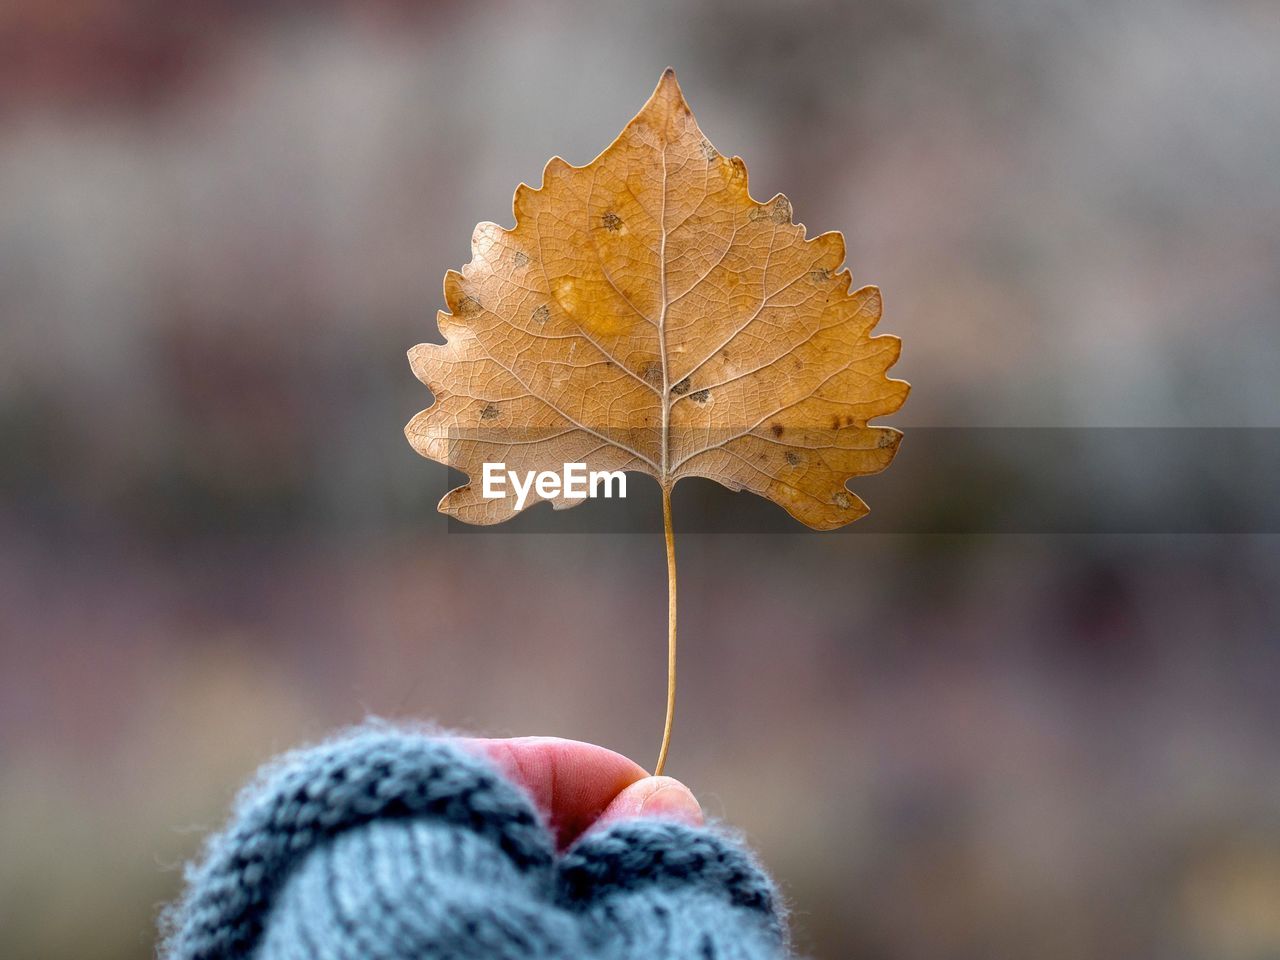 CLOSE-UP OF PERSON HOLDING DRY MAPLE LEAF